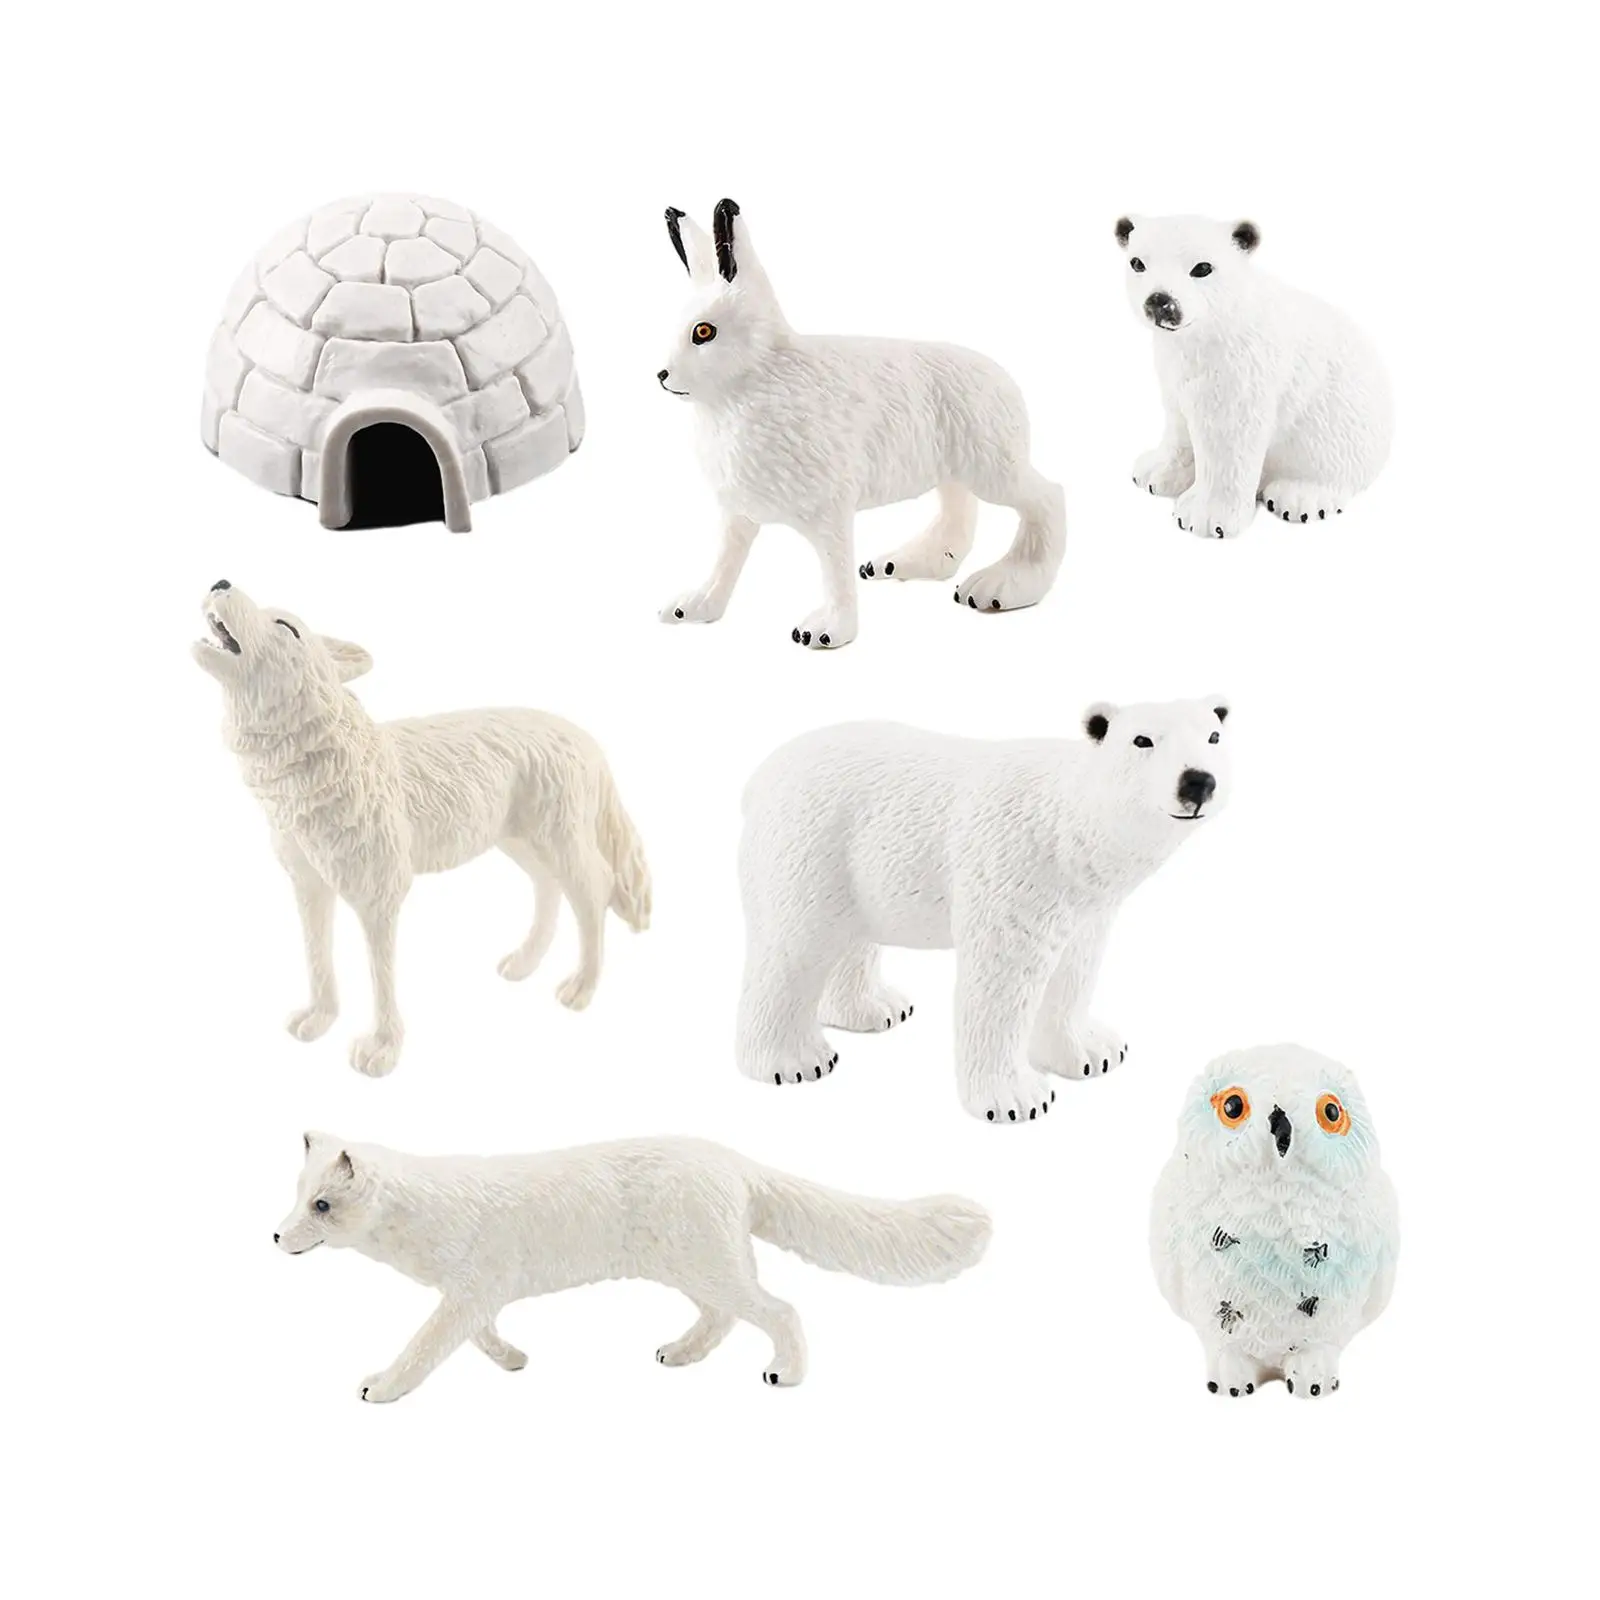 7 Pieces Arctic Animal Model Miniatures for Collection Ornament Party Favors